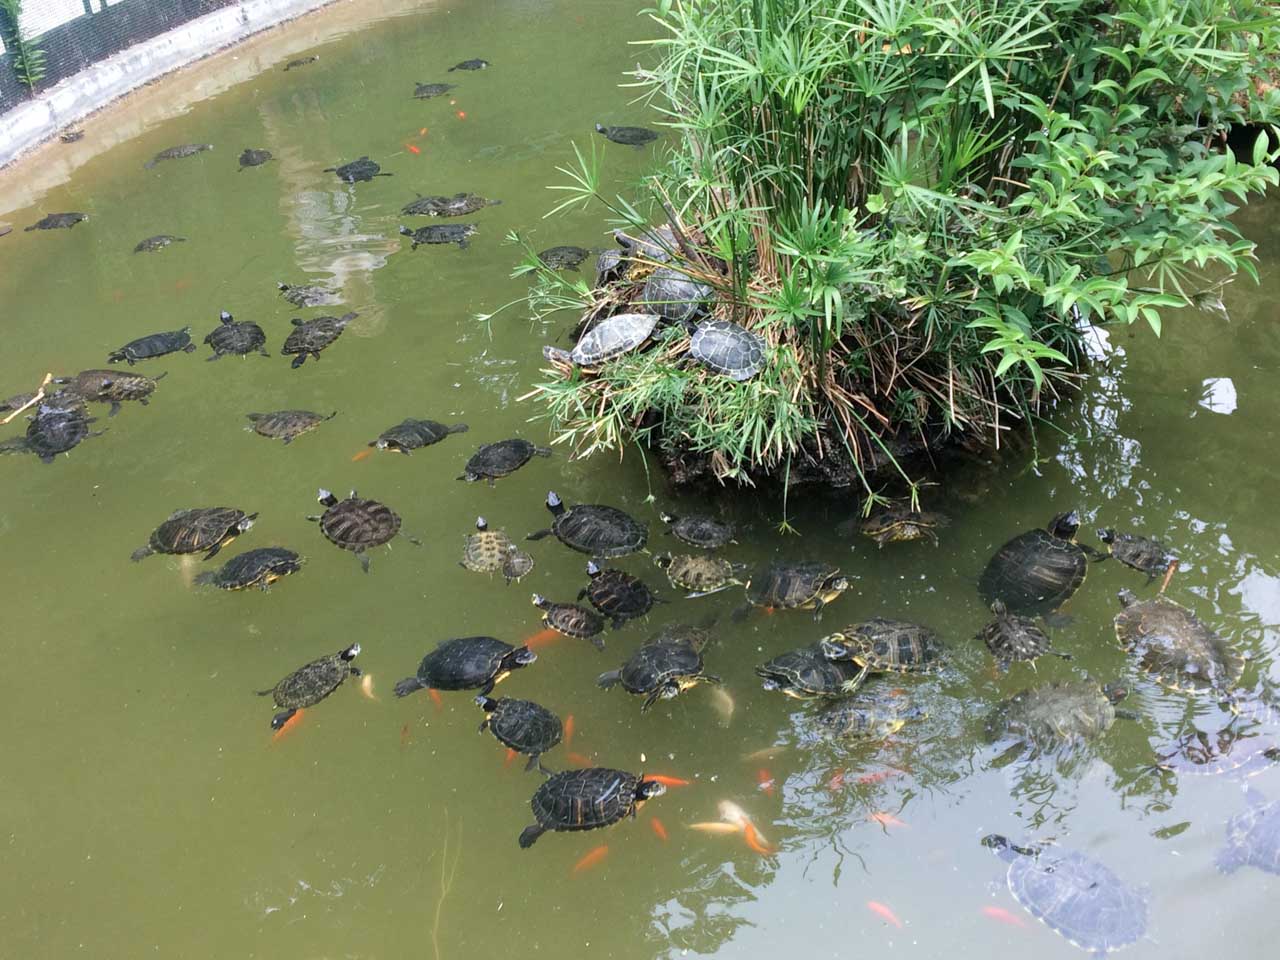 Dozens of turtles swimming in a pond